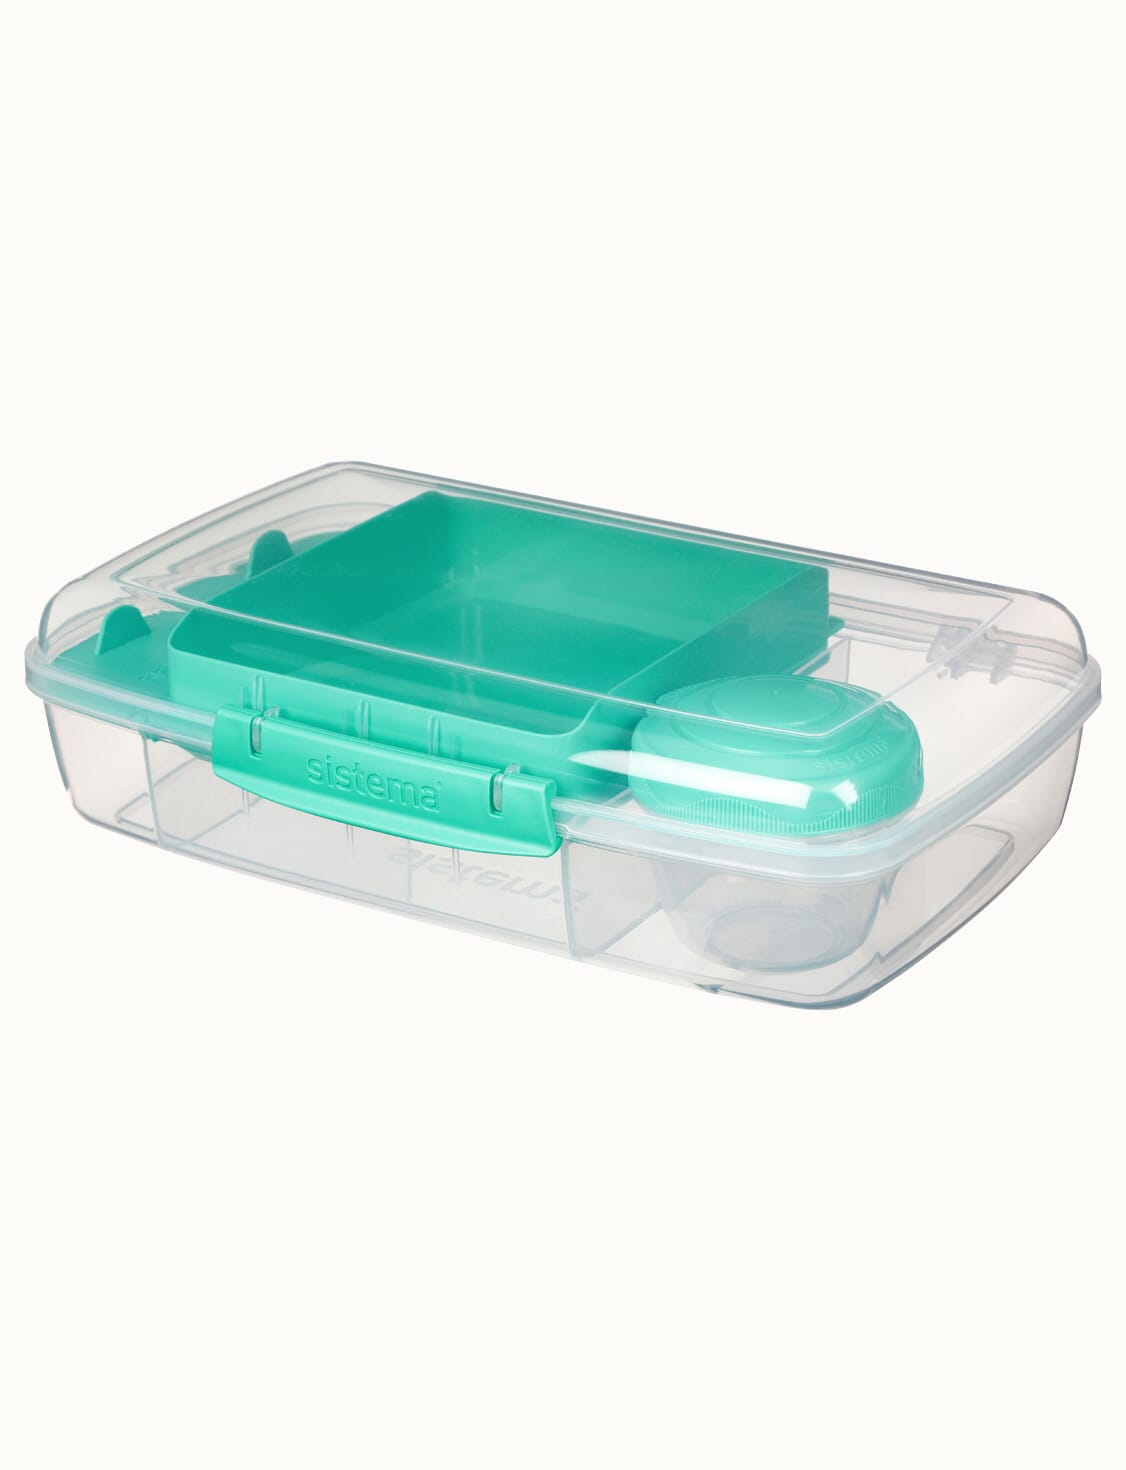 Large 52-oz Lunch Container Tupperware, Salad Bowl with 3